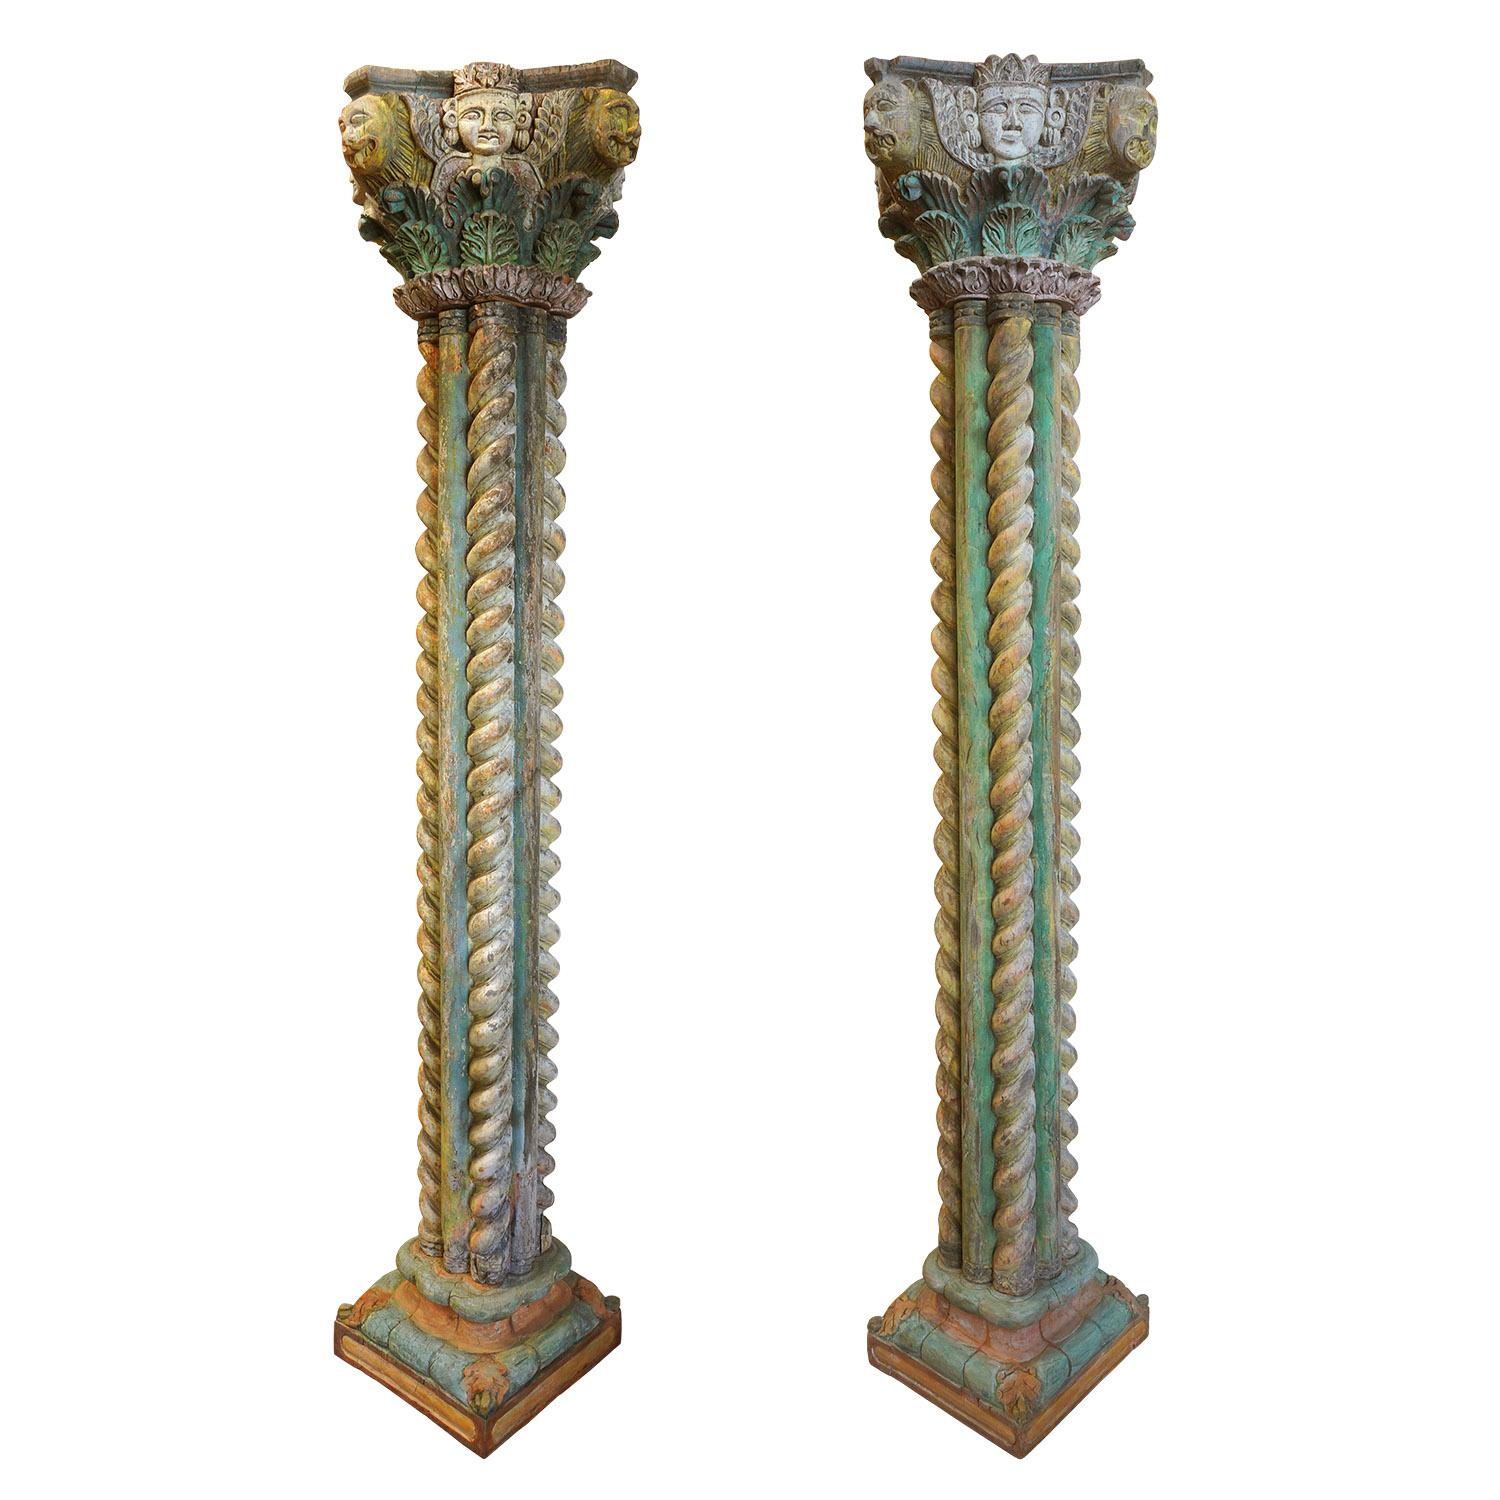 Other Large Pair of Indian Architectural Columns For Sale